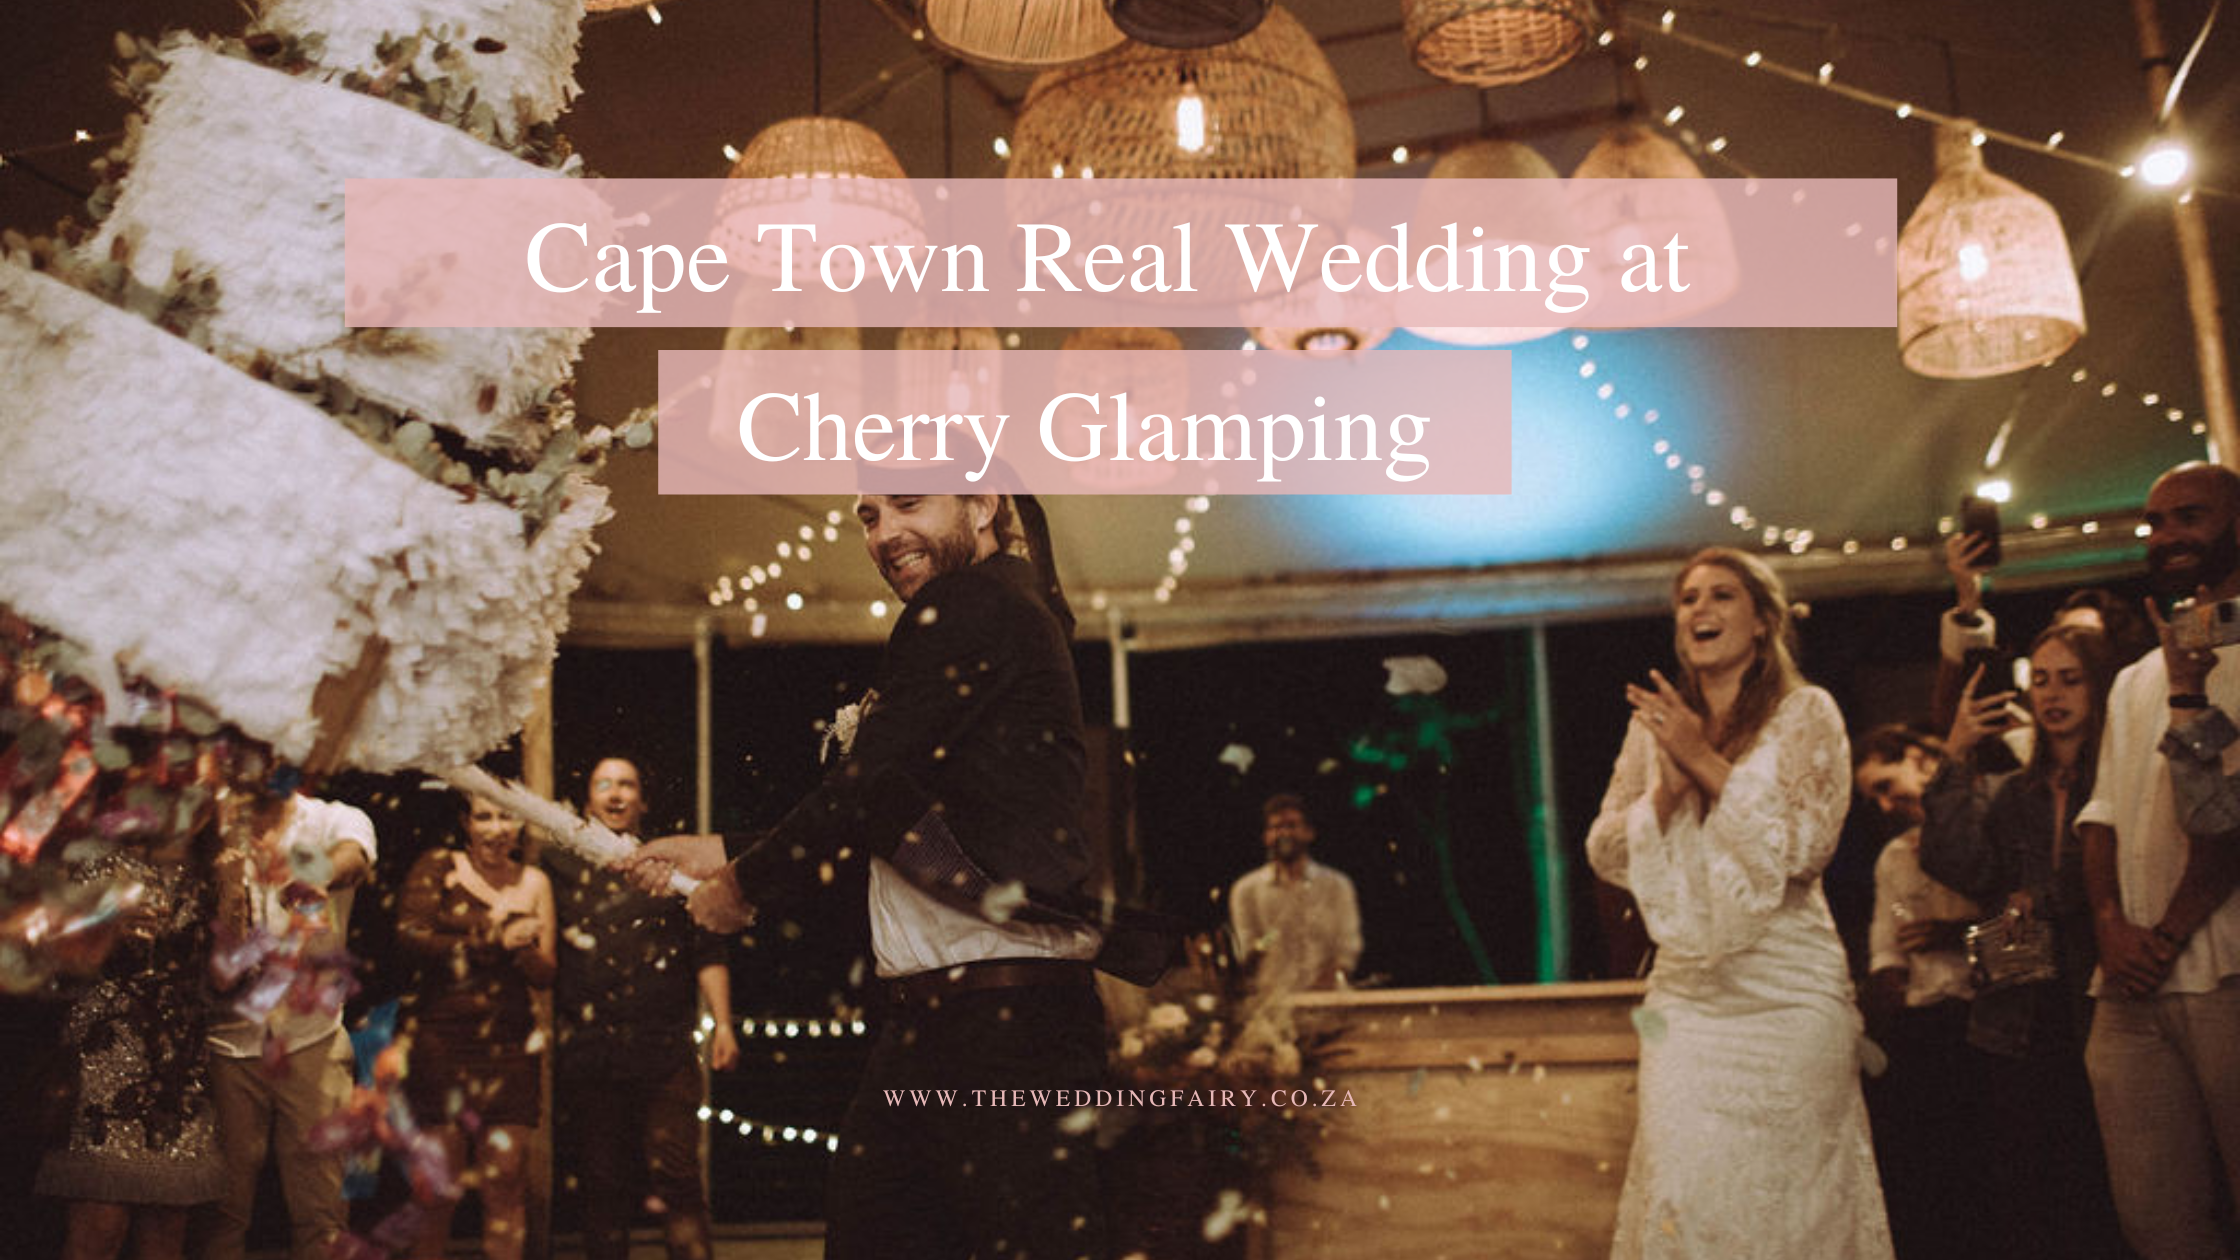 Cape Town Wedding at Cherry Glamping